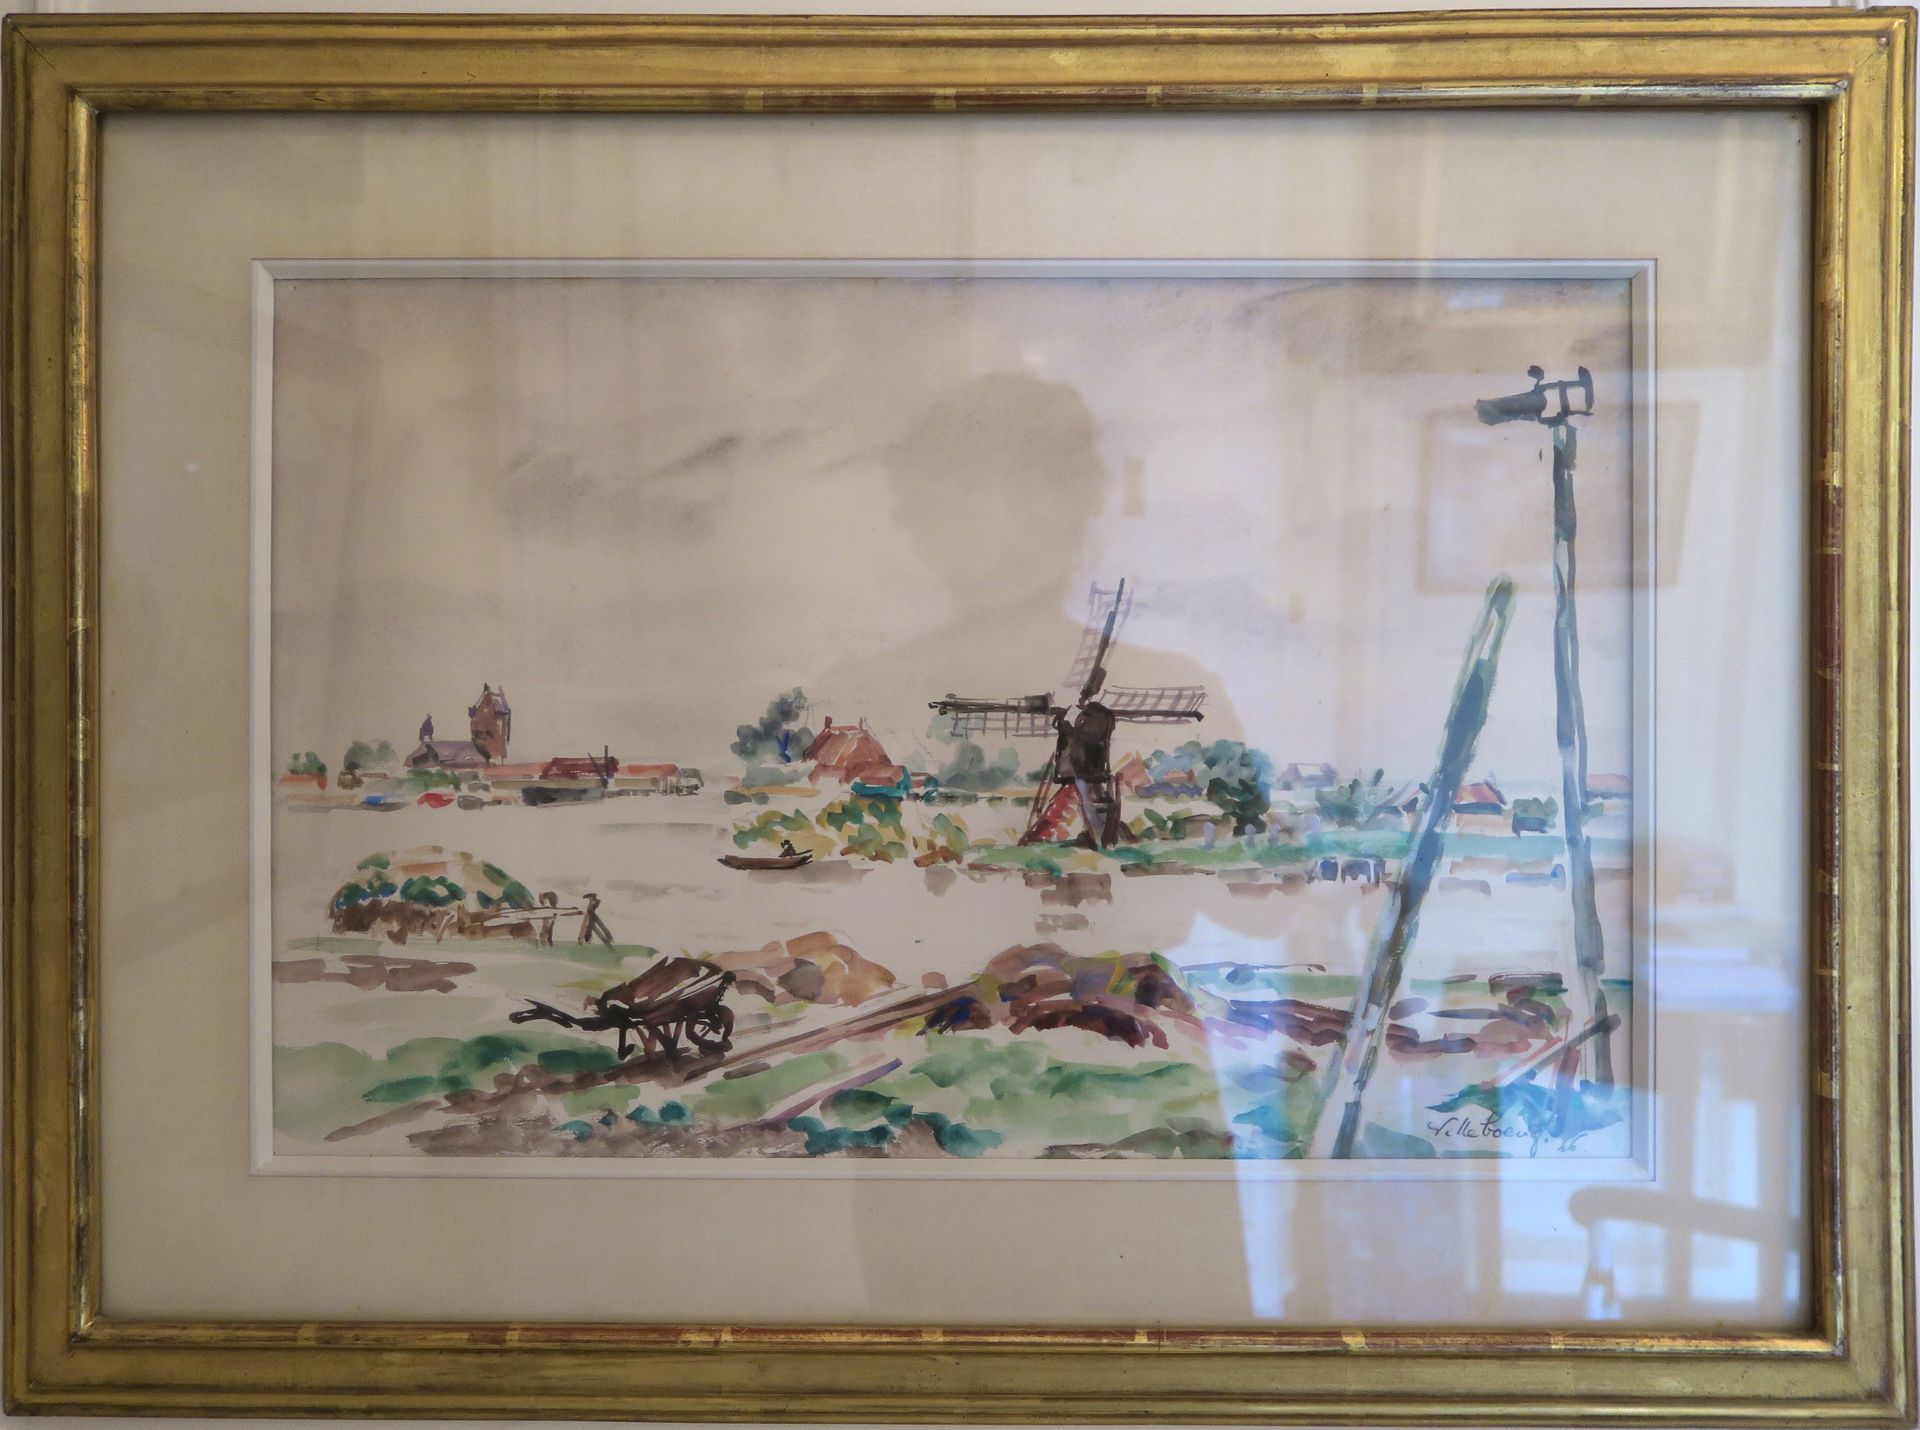 Null André VILLEBOEUF (1893-1956) 

"Mühle am Pikmeer" (Holland),1946 

Aquarell&hellip;